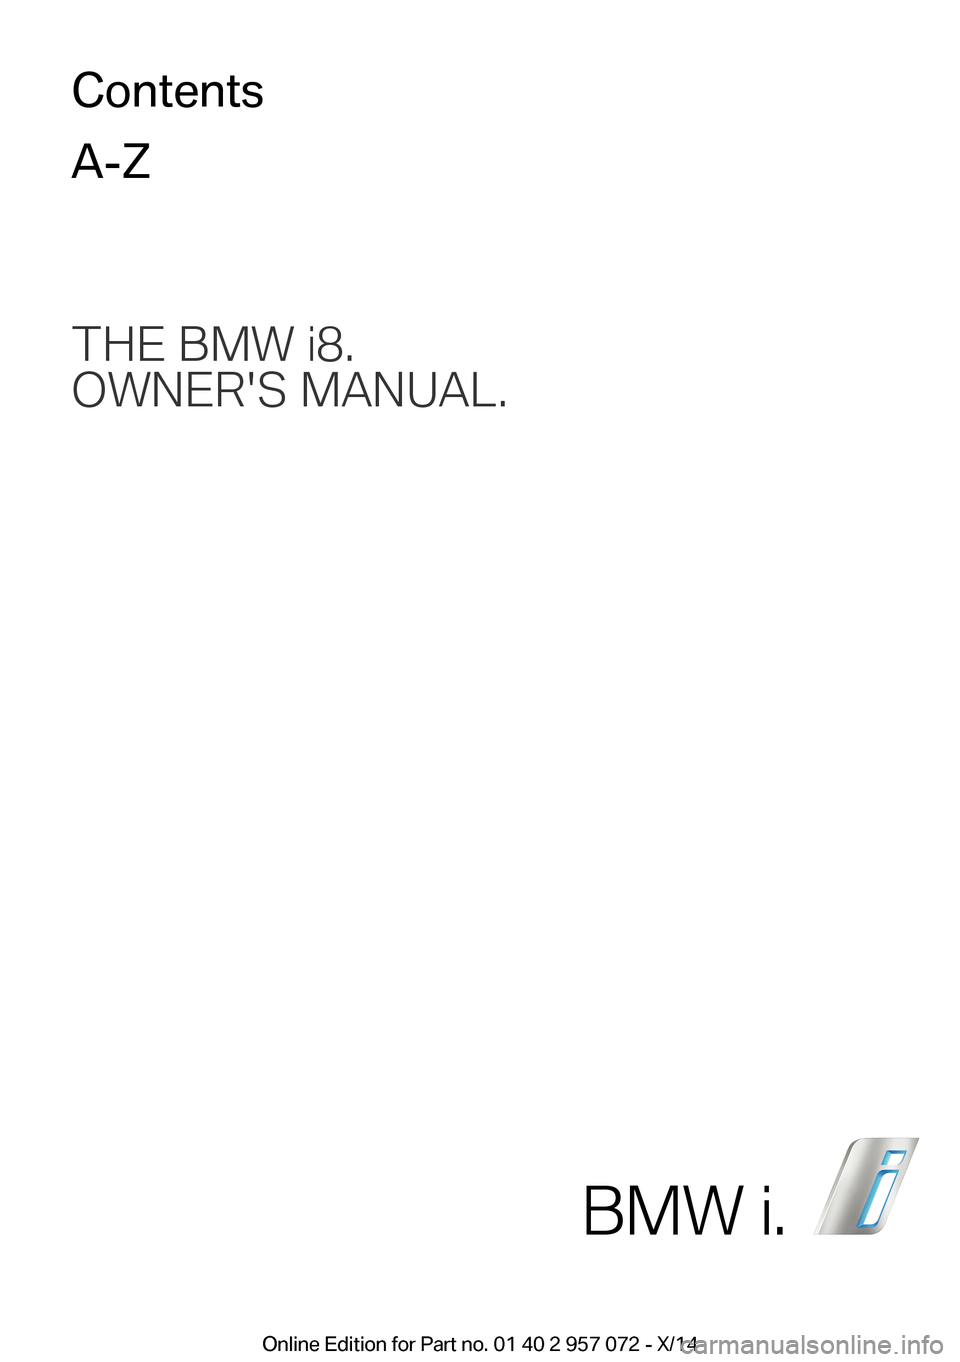 BMW I8 2014 I12 Owners Manual THE BMW i8.
OWNERS MANUAL.ContentsA-Z
BMW i.
Online Edition for Part no. 01 40 2 957 072 - X/14 